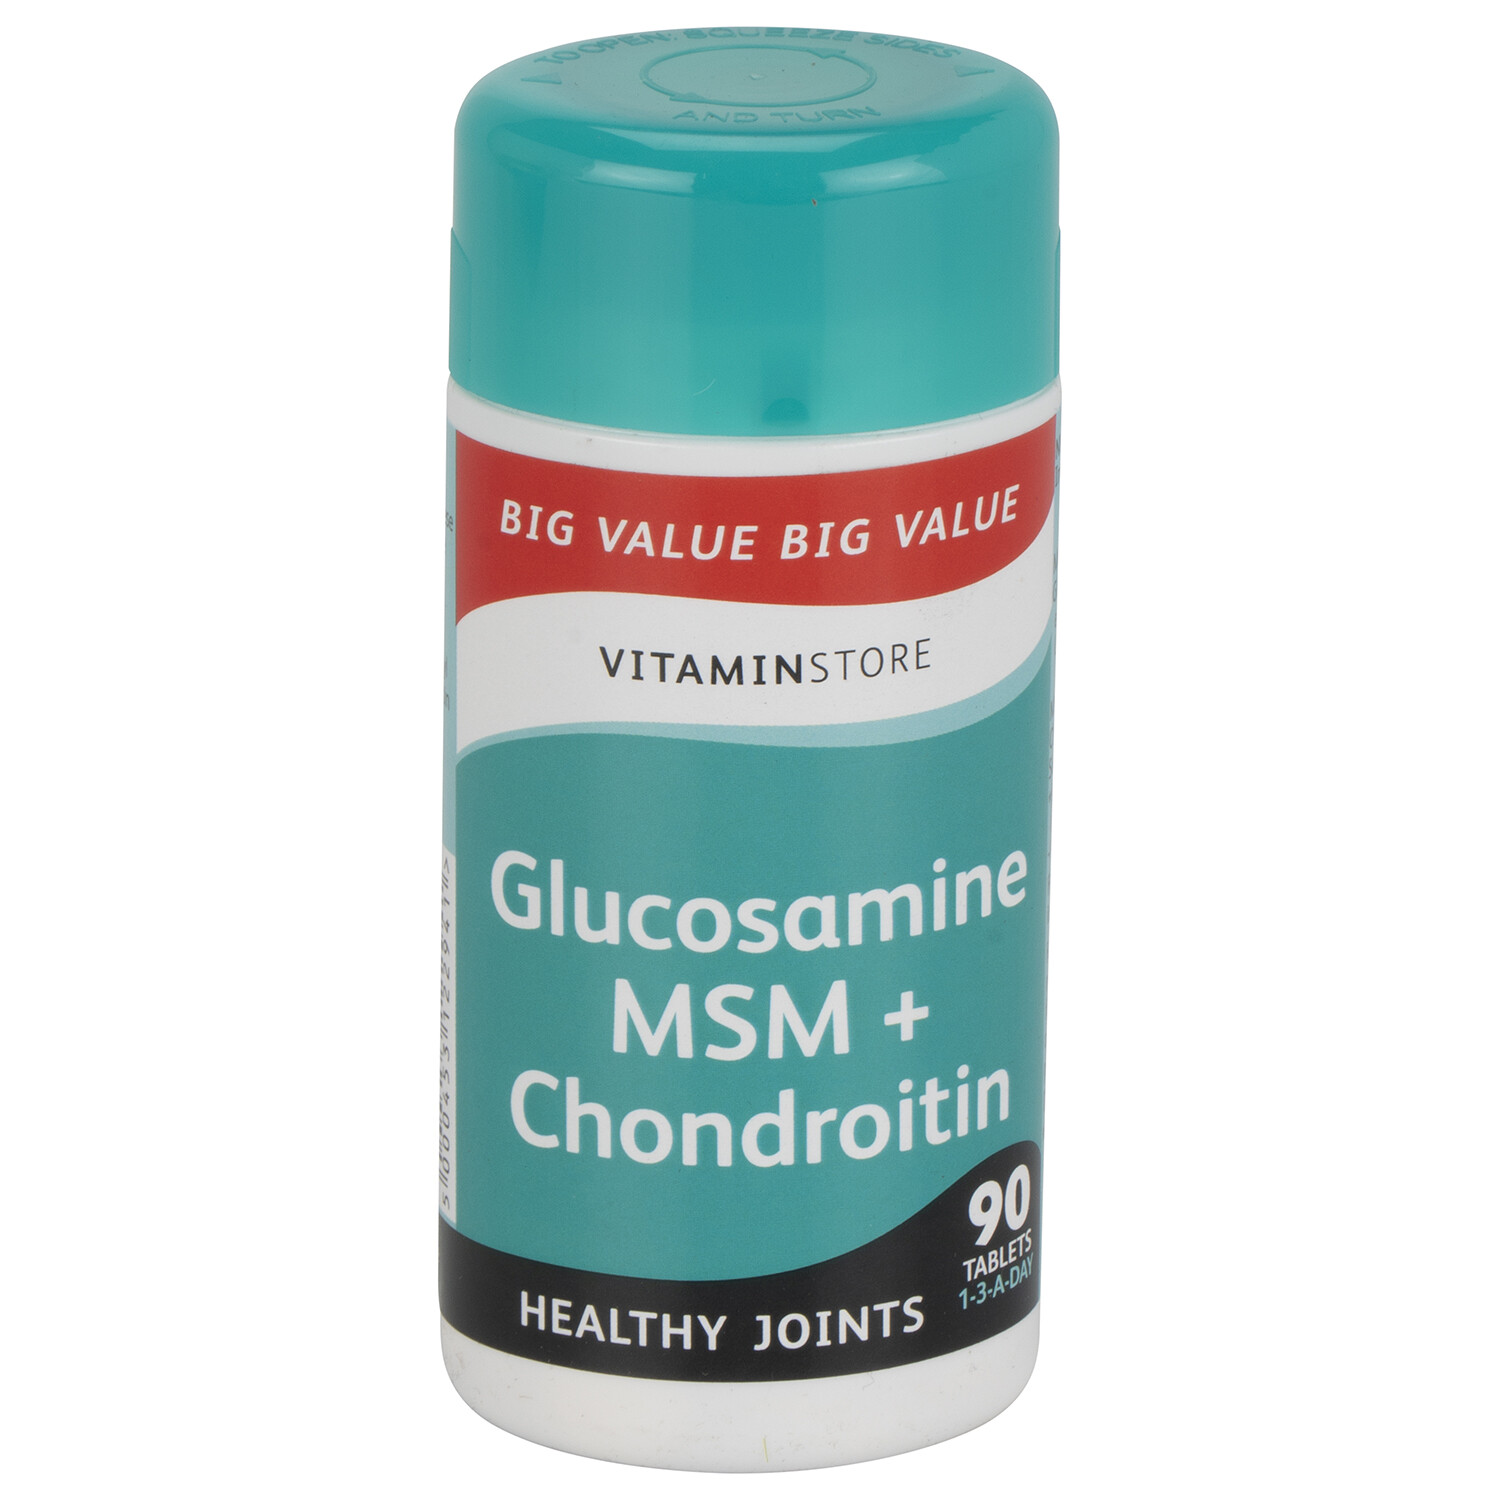 Glucosamine MSM and Chondroitin Tablets Image